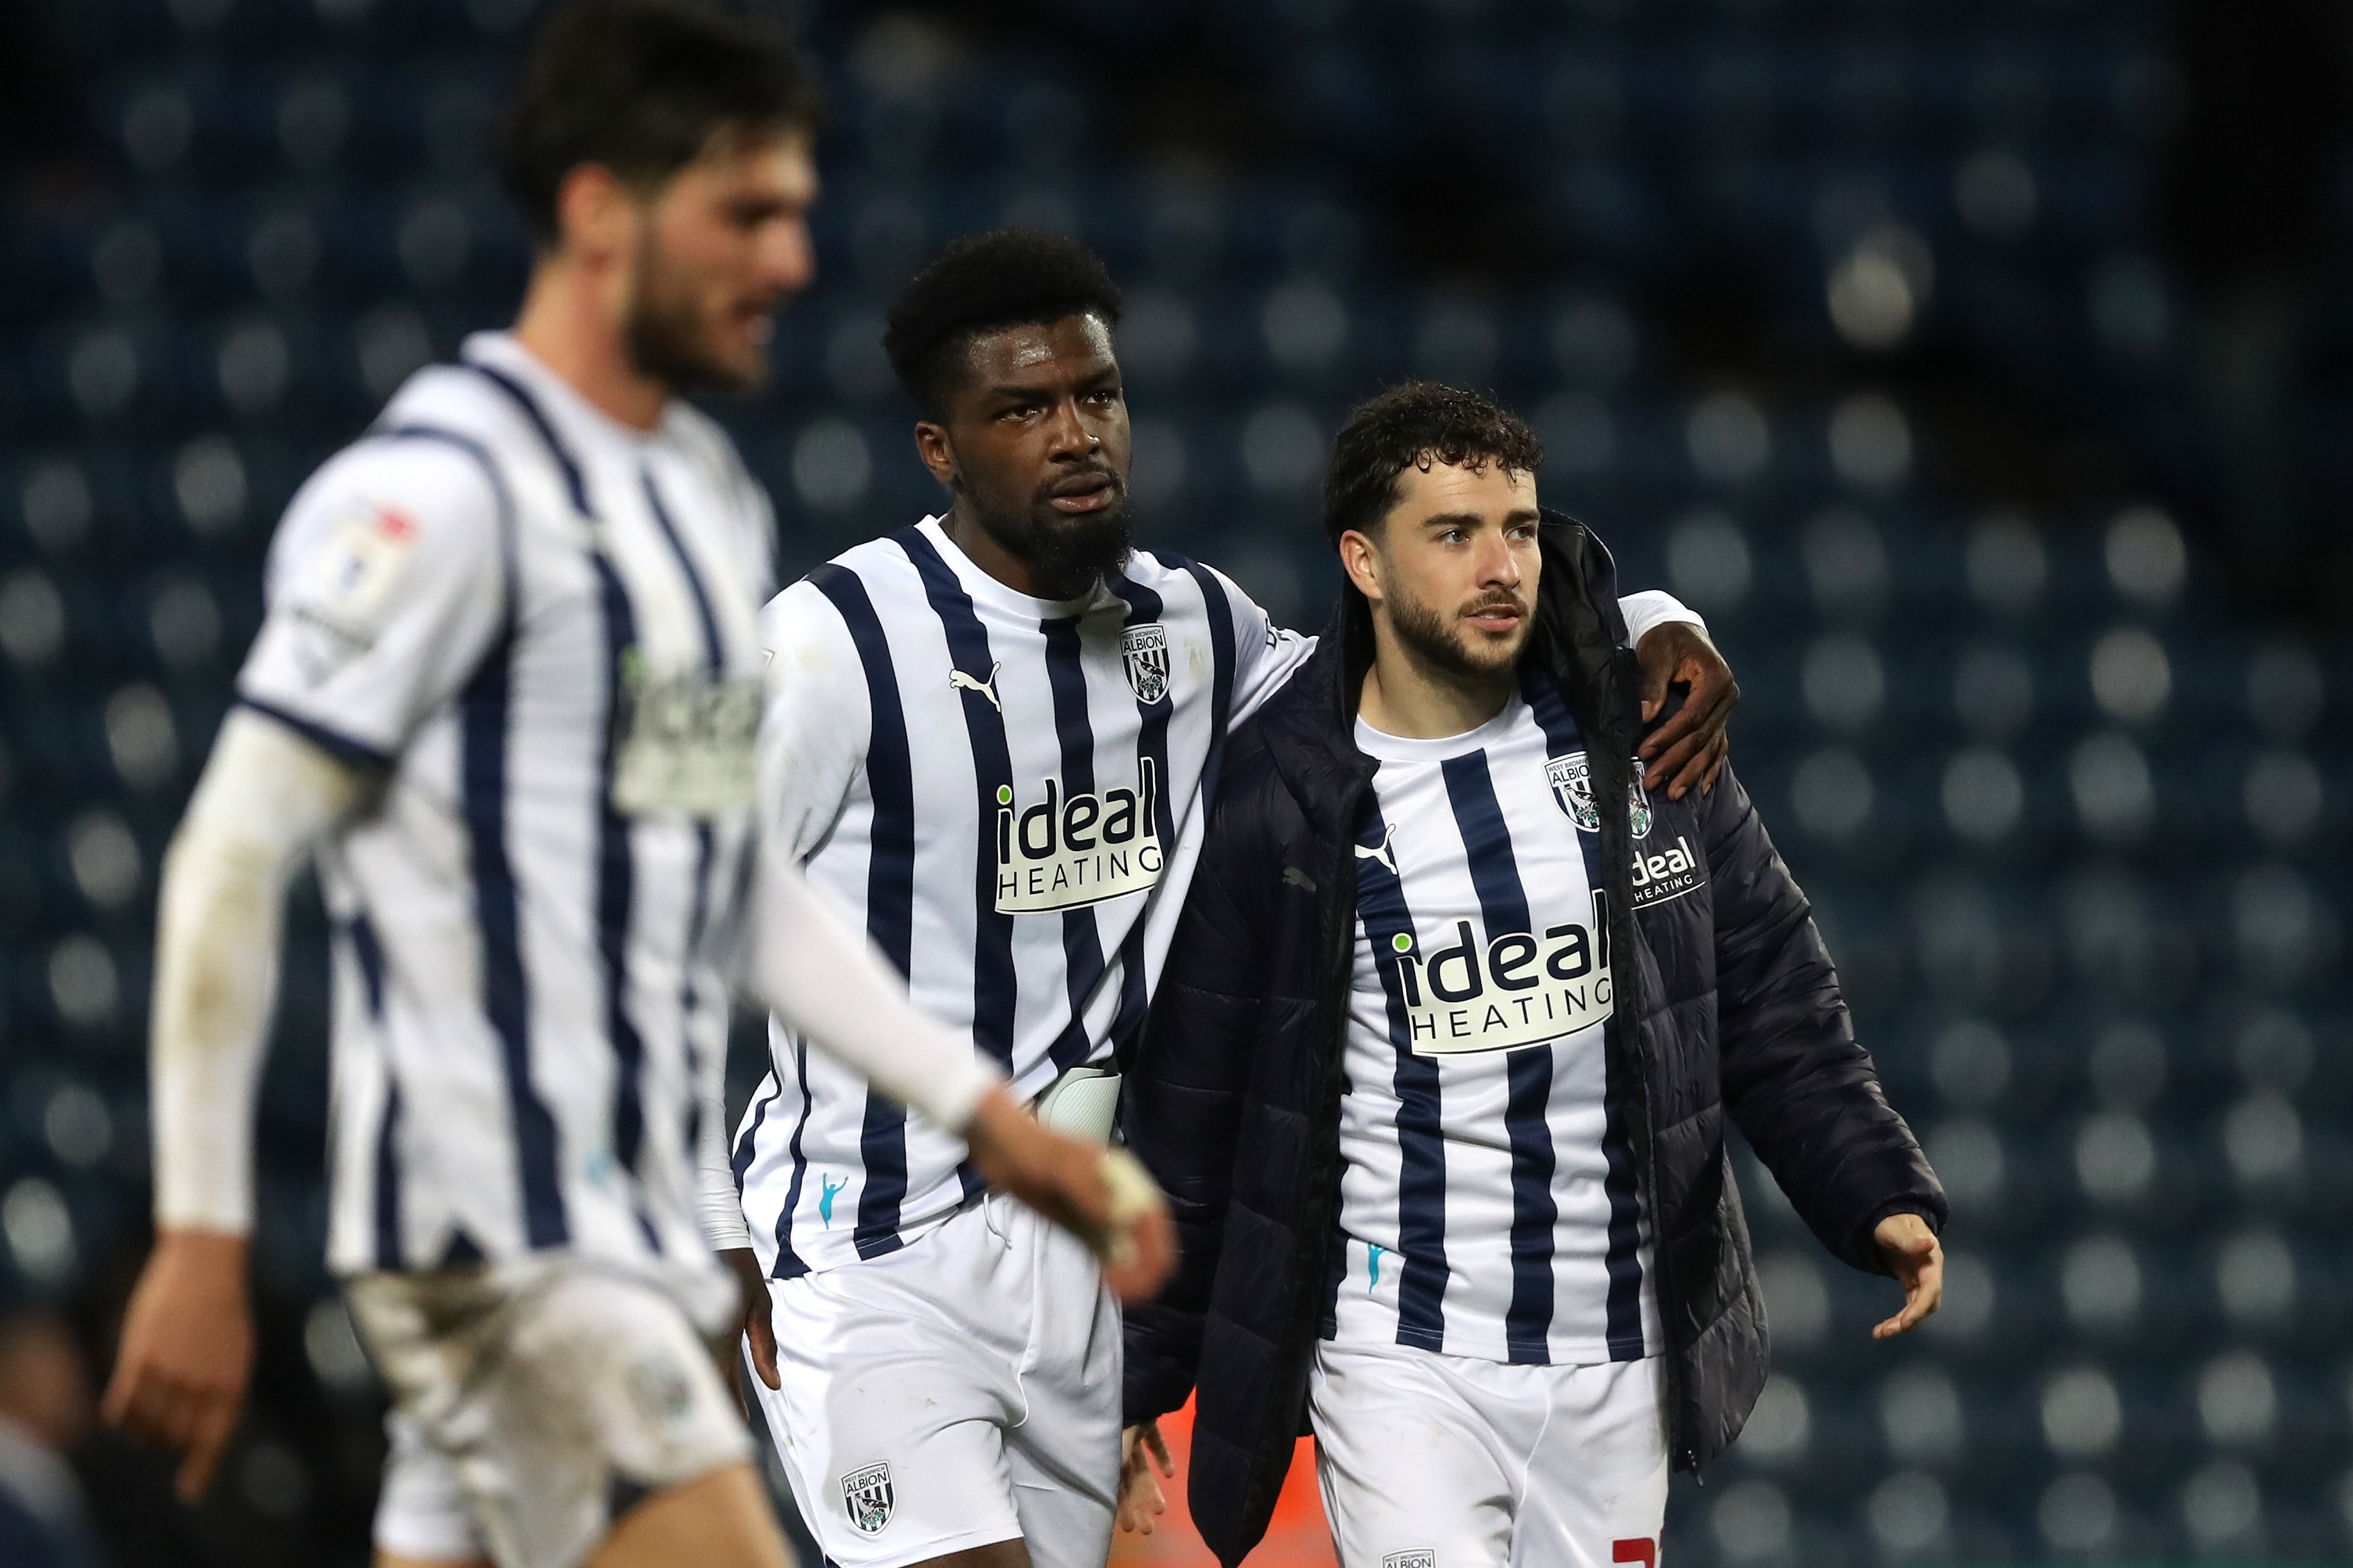 Cedric Kipre and Mikey Johnston on the pitch together after beating Cardiff